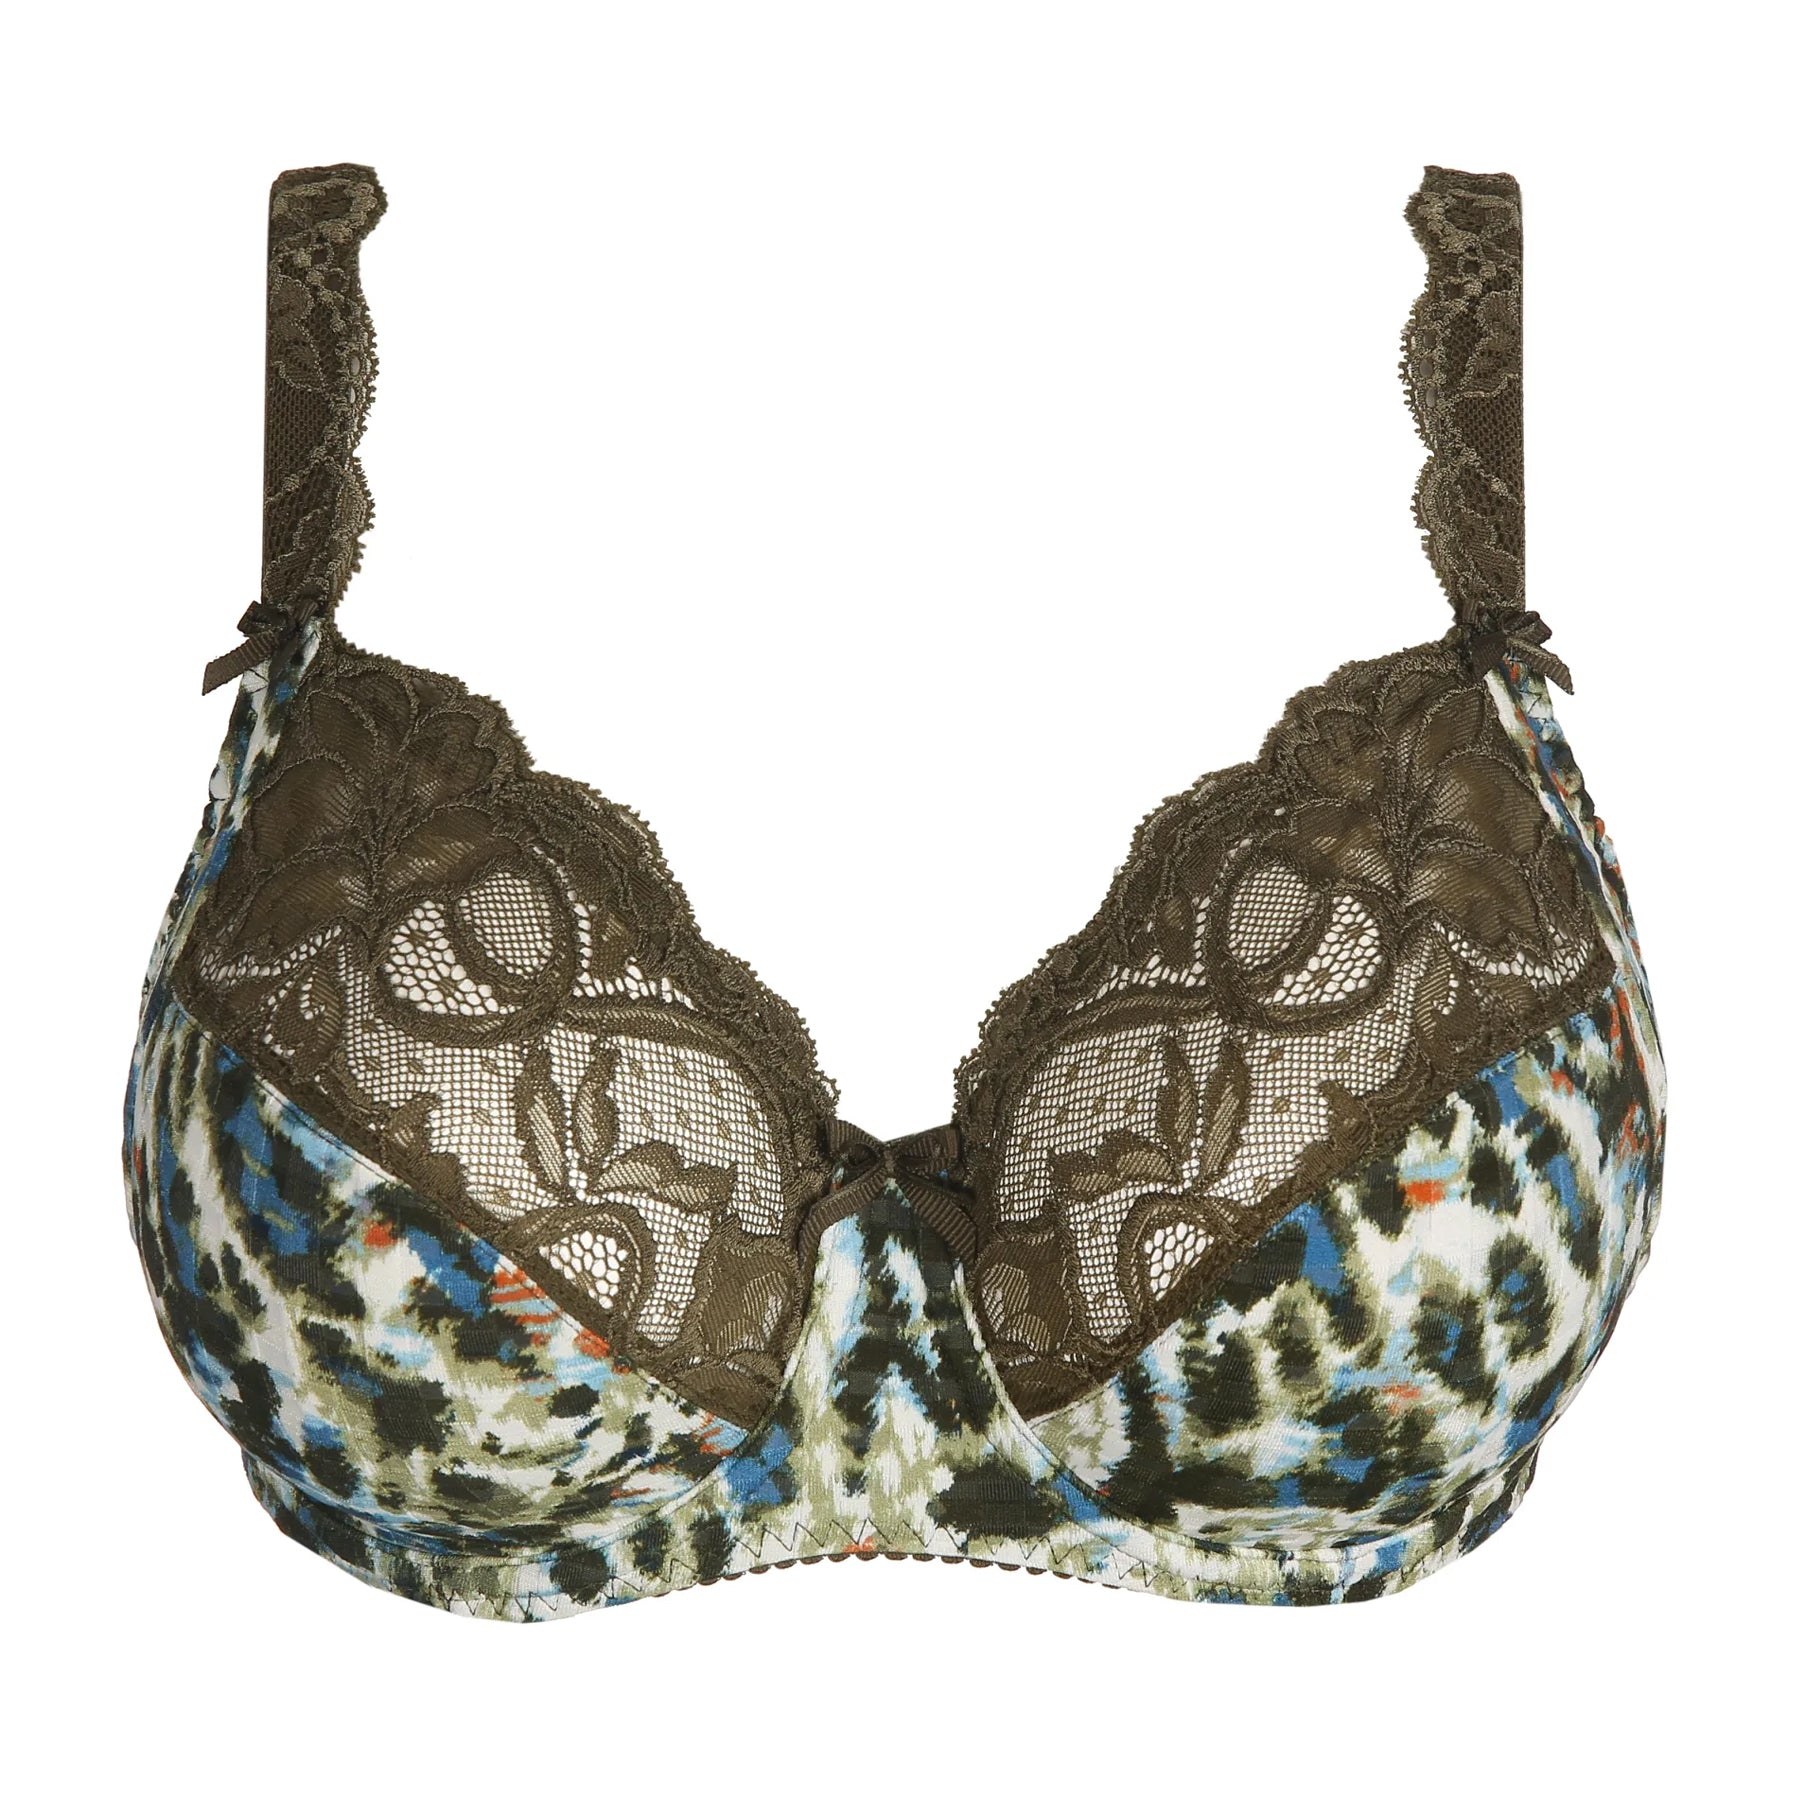 PrimaDonna Madison 0162120/21 Women's Bleu Bijou Lace Wired Full Cup Bra 32D  : PrimaDonna: : Clothing, Shoes & Accessories